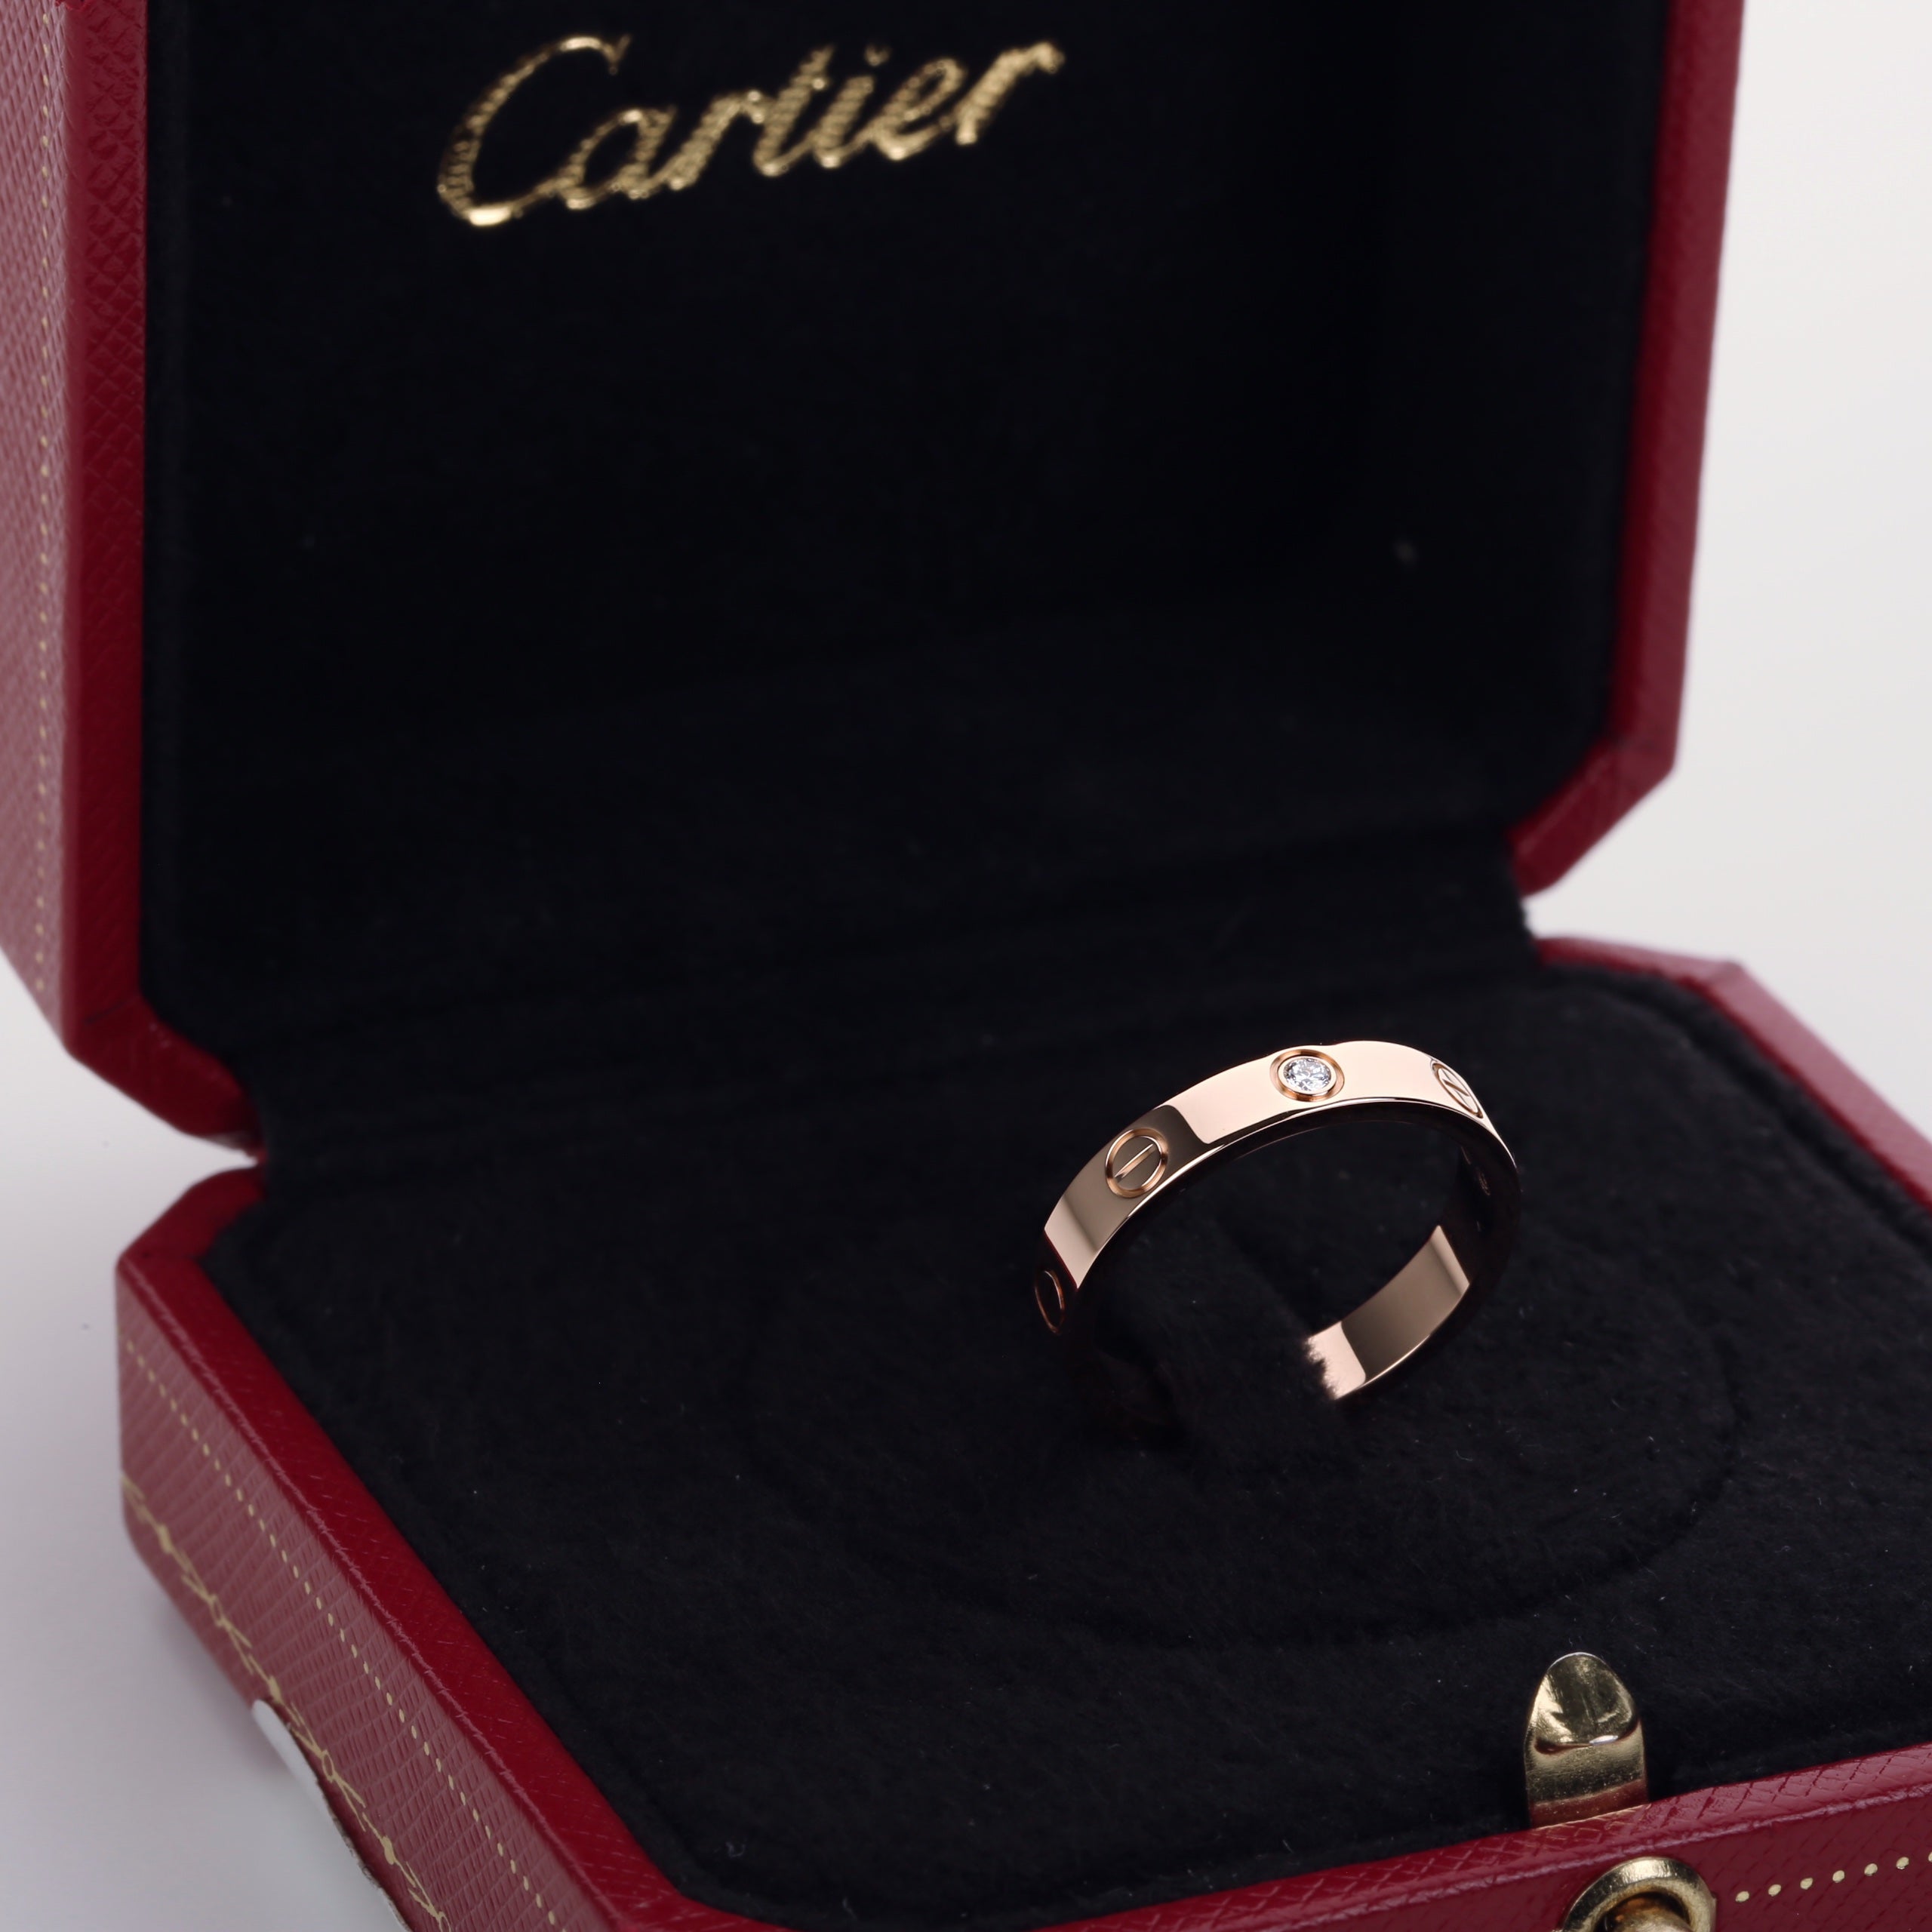 cartier love wedding band pink gold price